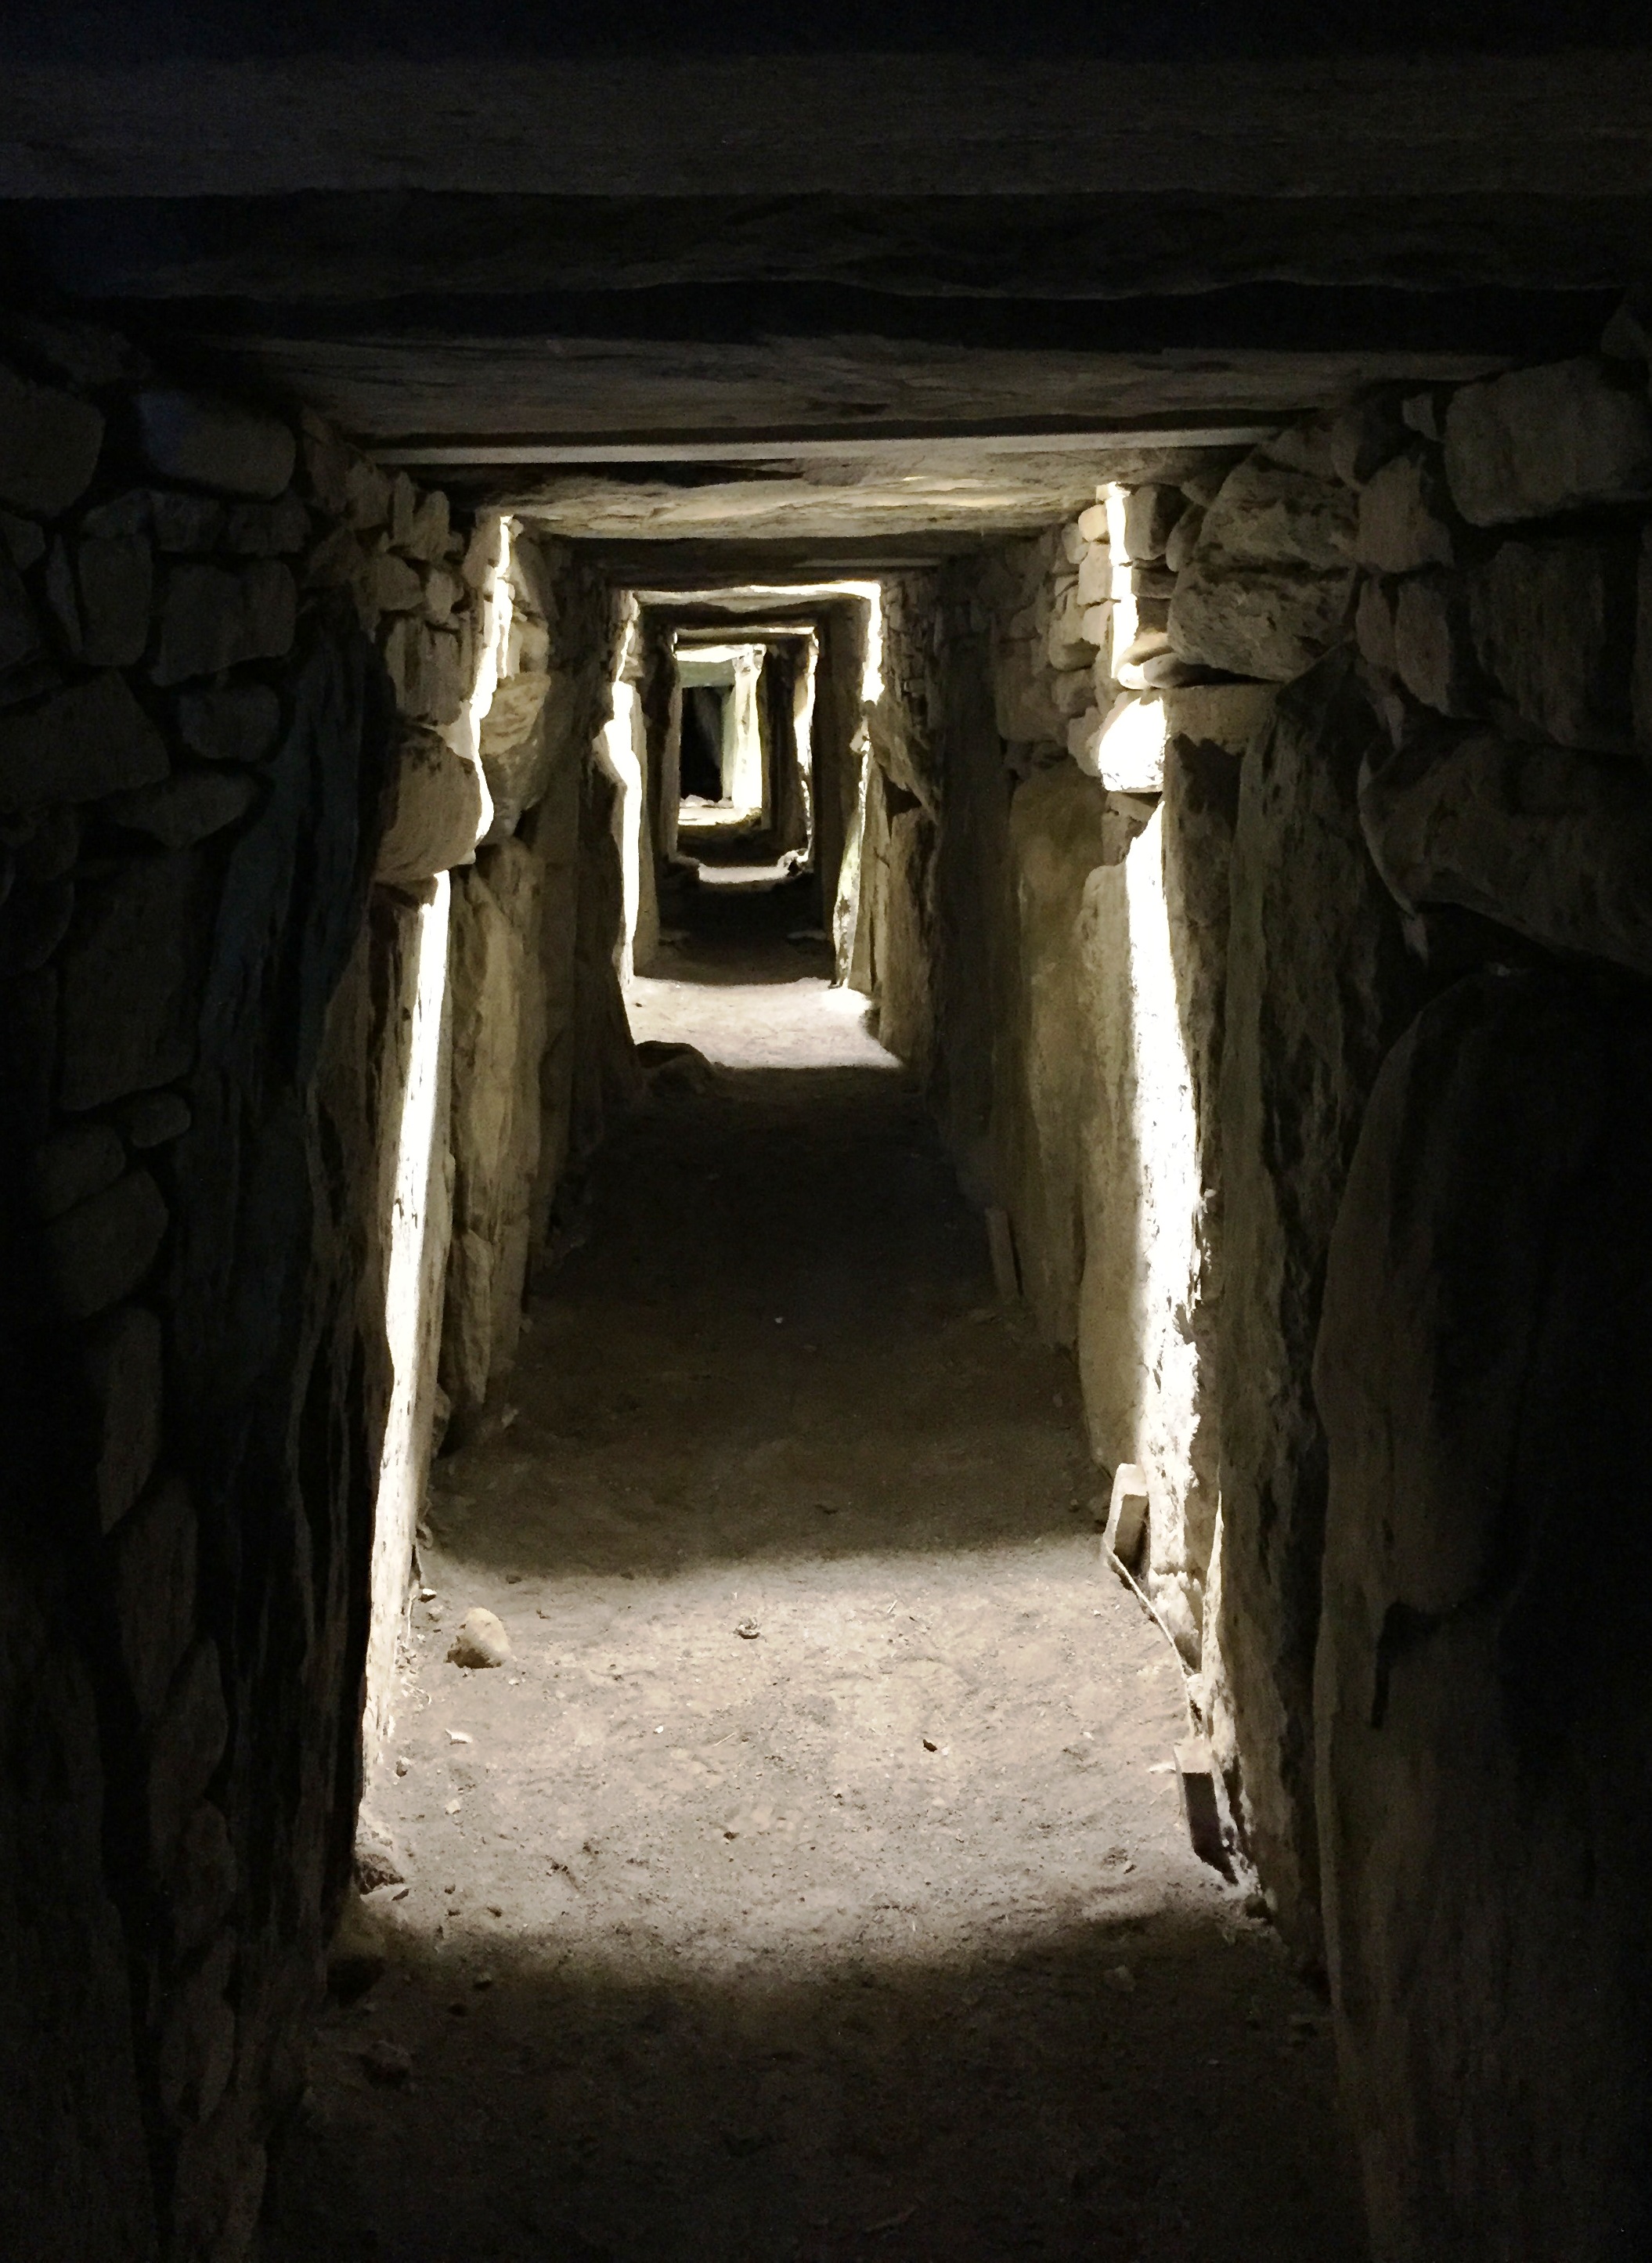 Looking down one of the central passages in the Knowth mound. Photo by Martha Clark.